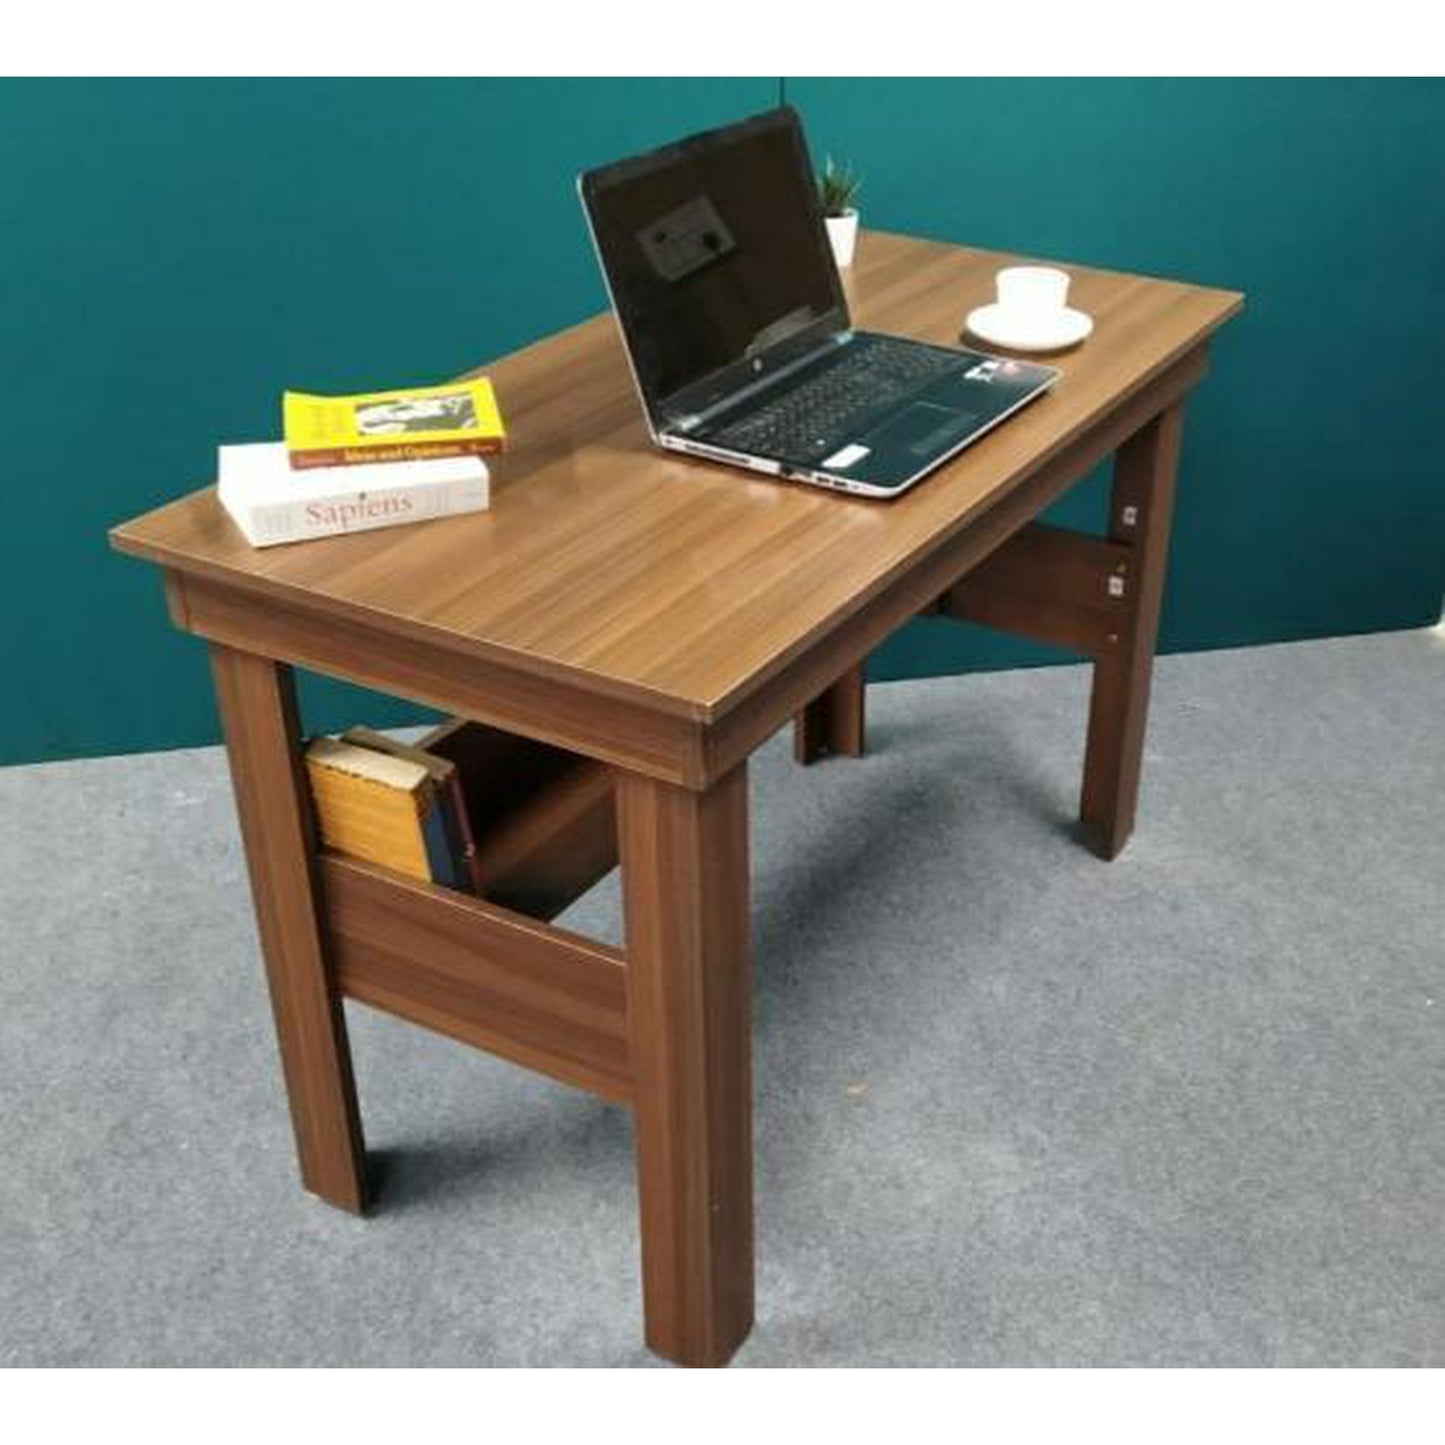 Wooden Study Table - The Teal Thread